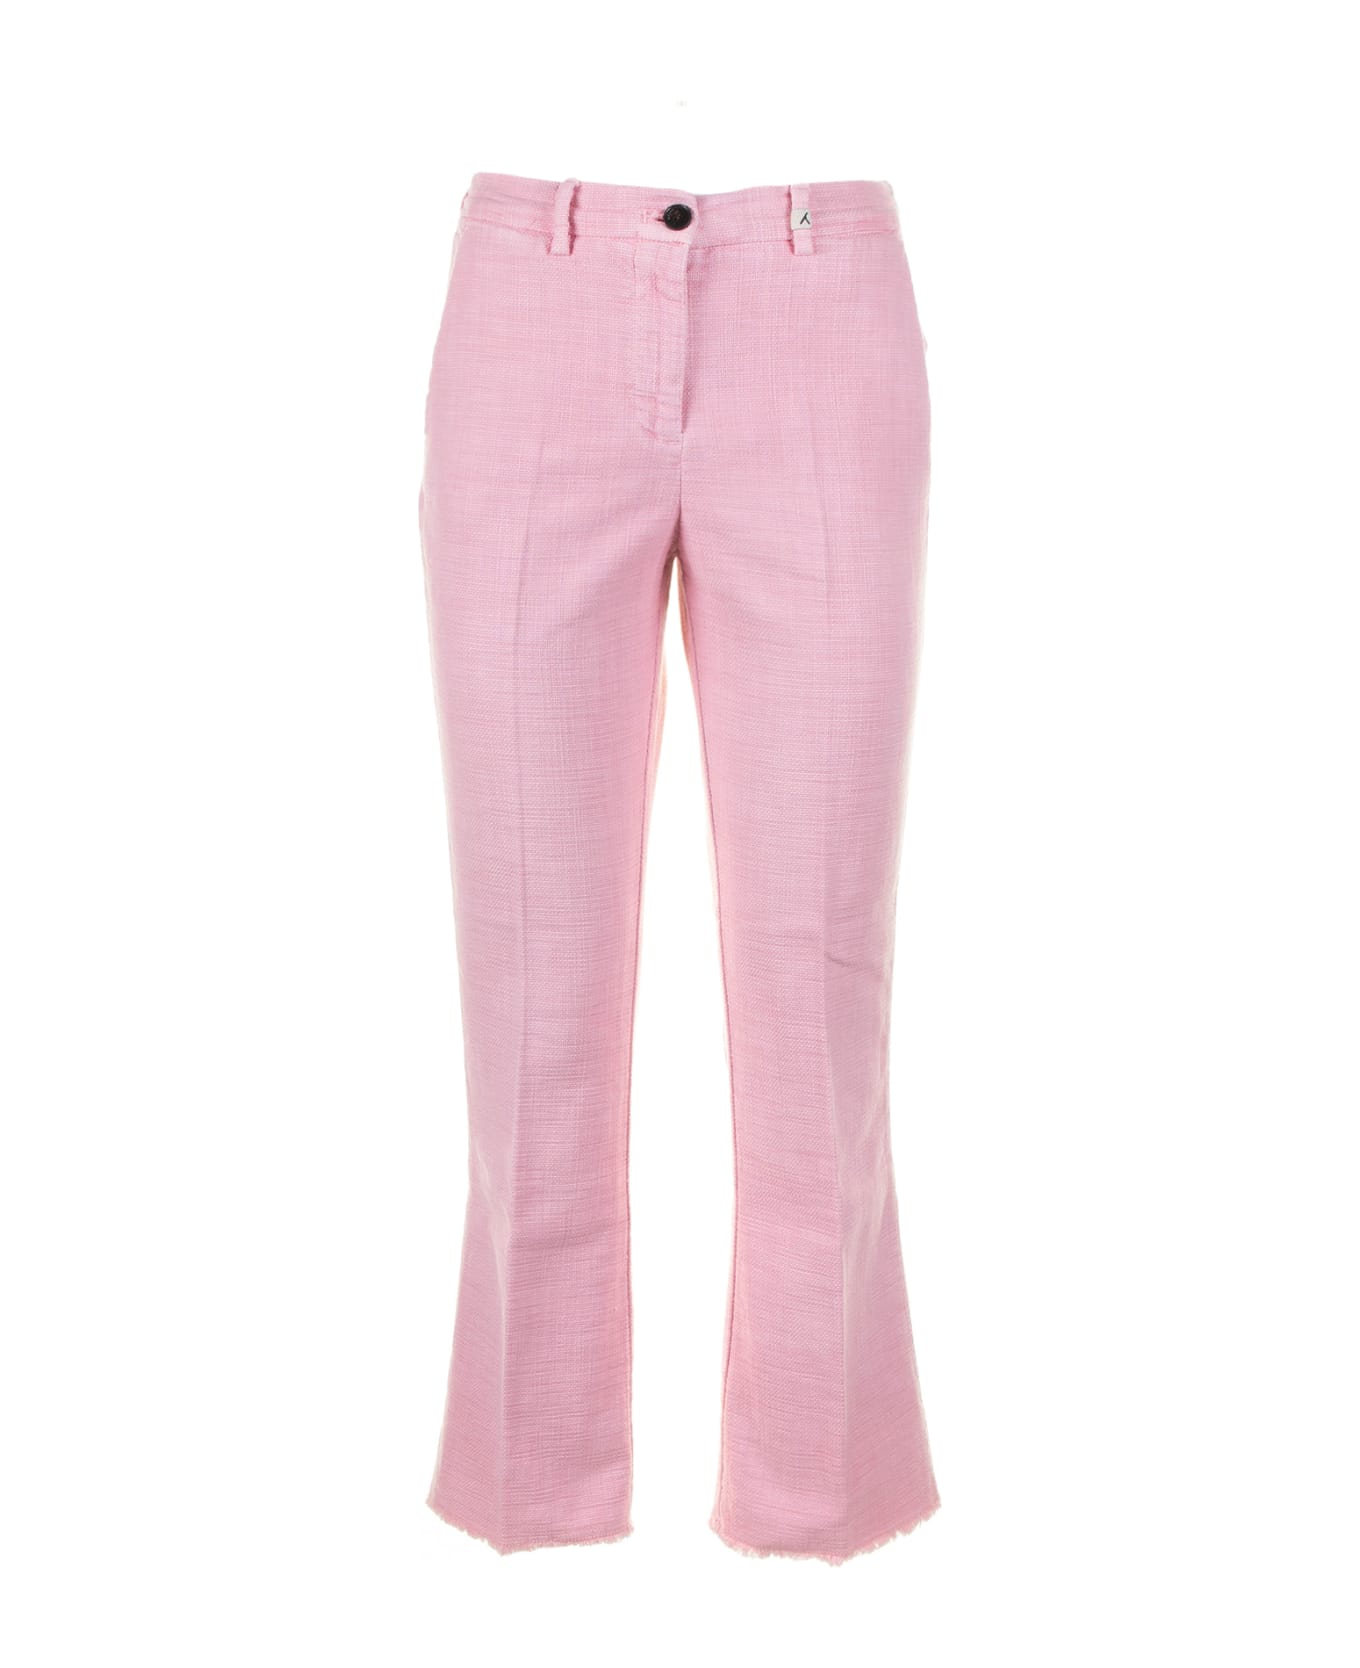 Myths Women's Pink Trousers - ROSA